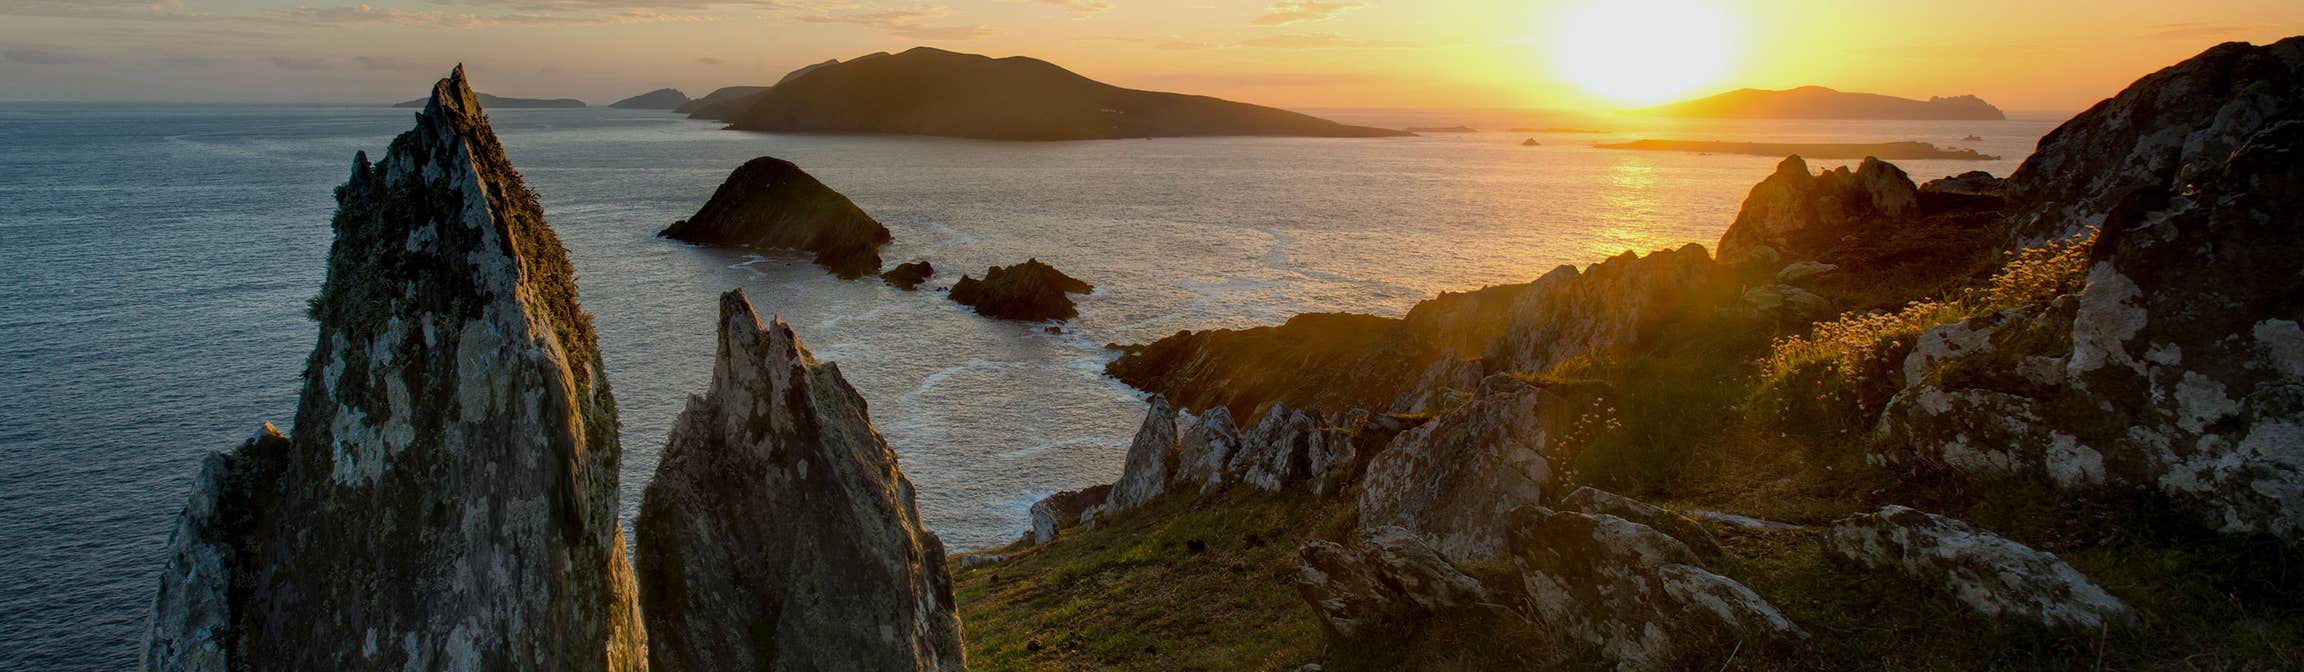 Sunset above the sea and coastline on the Dingle Peninsula, County Kerry